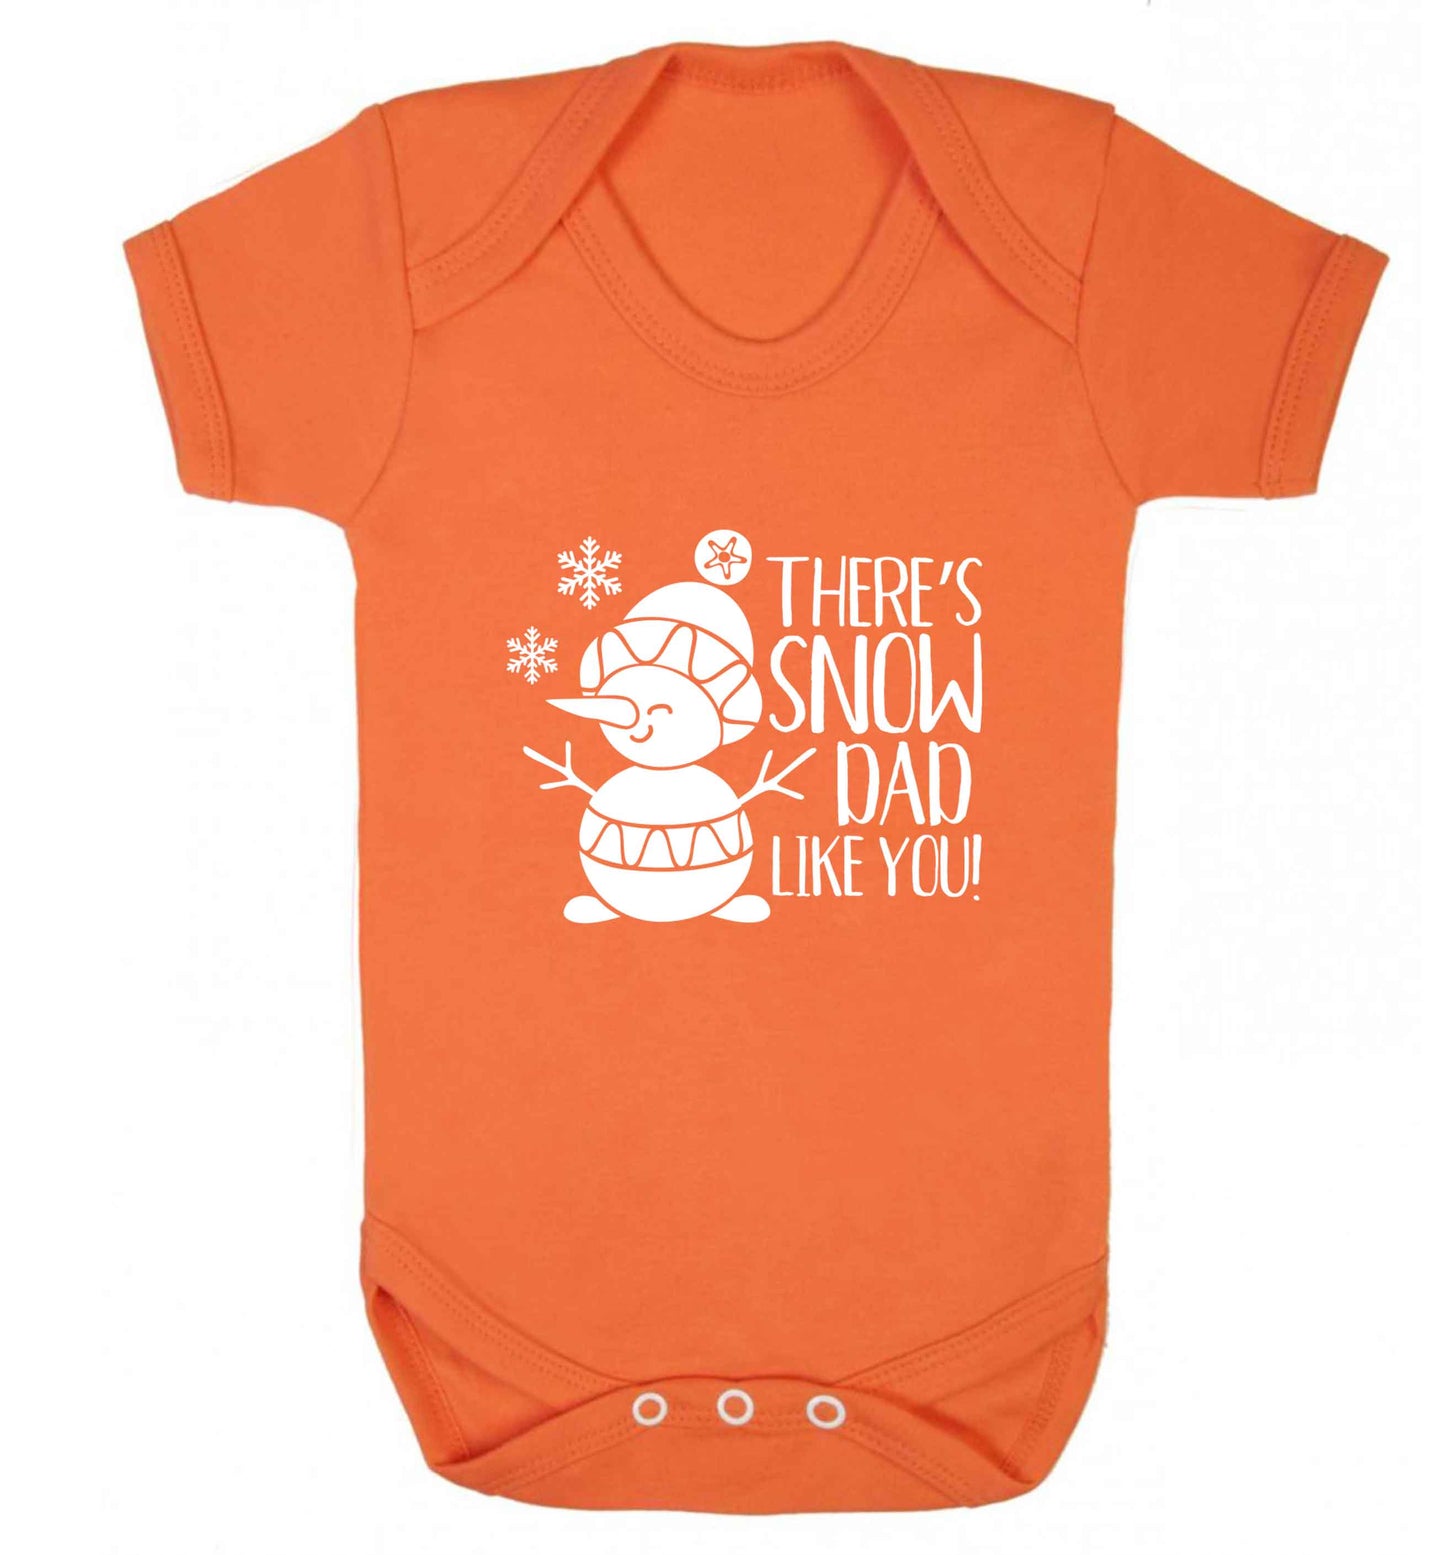 There's snow dad like you baby vest orange 18-24 months